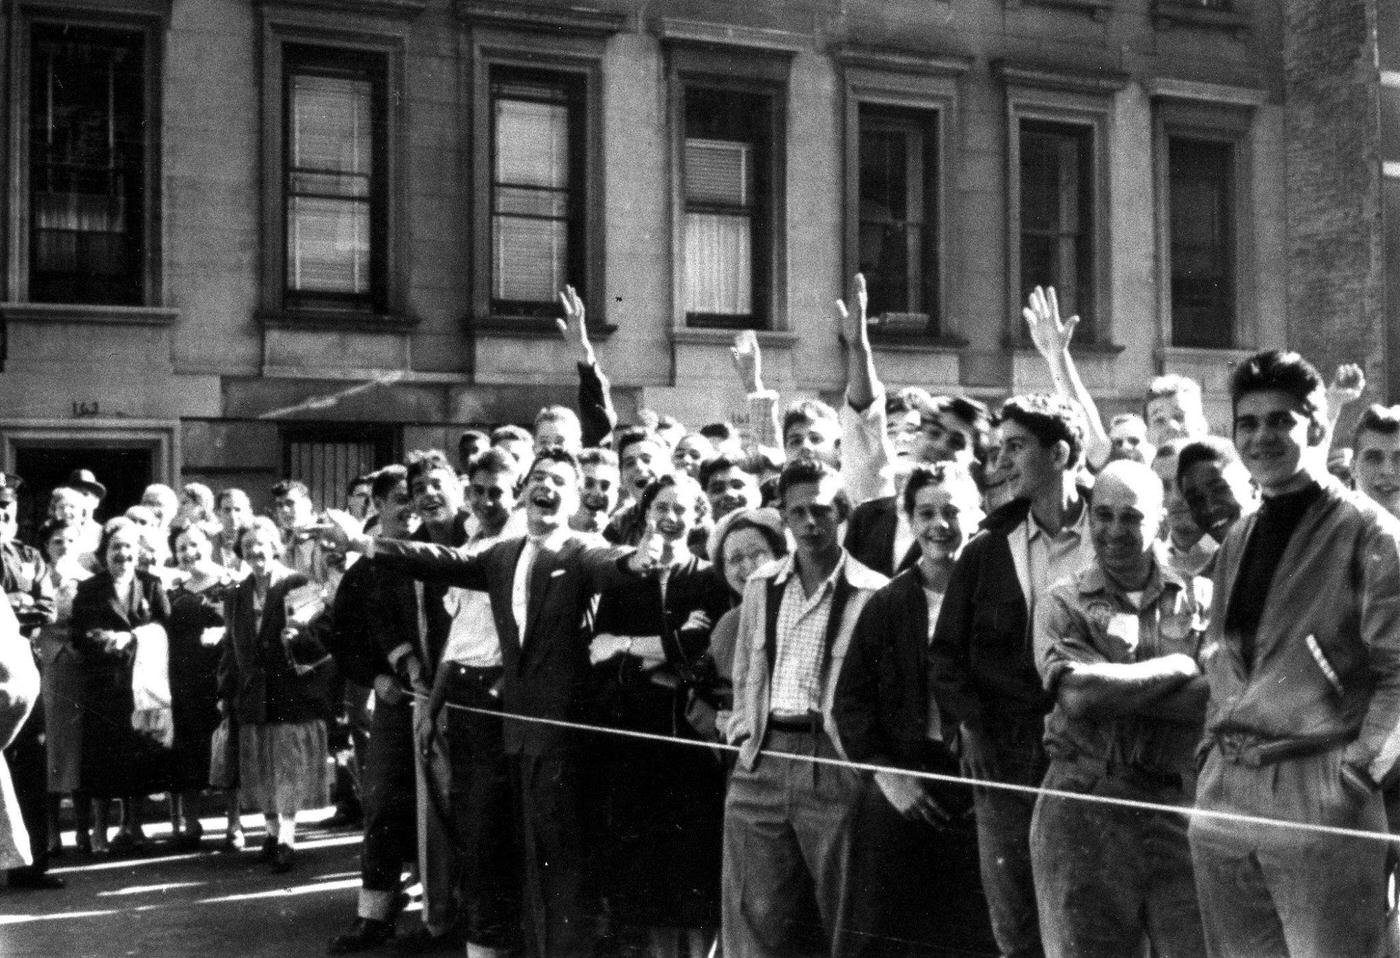 A crowd of fans waves to Marilyn Monroe in 1954 during the filming of "The Seven Year Itch" in New York